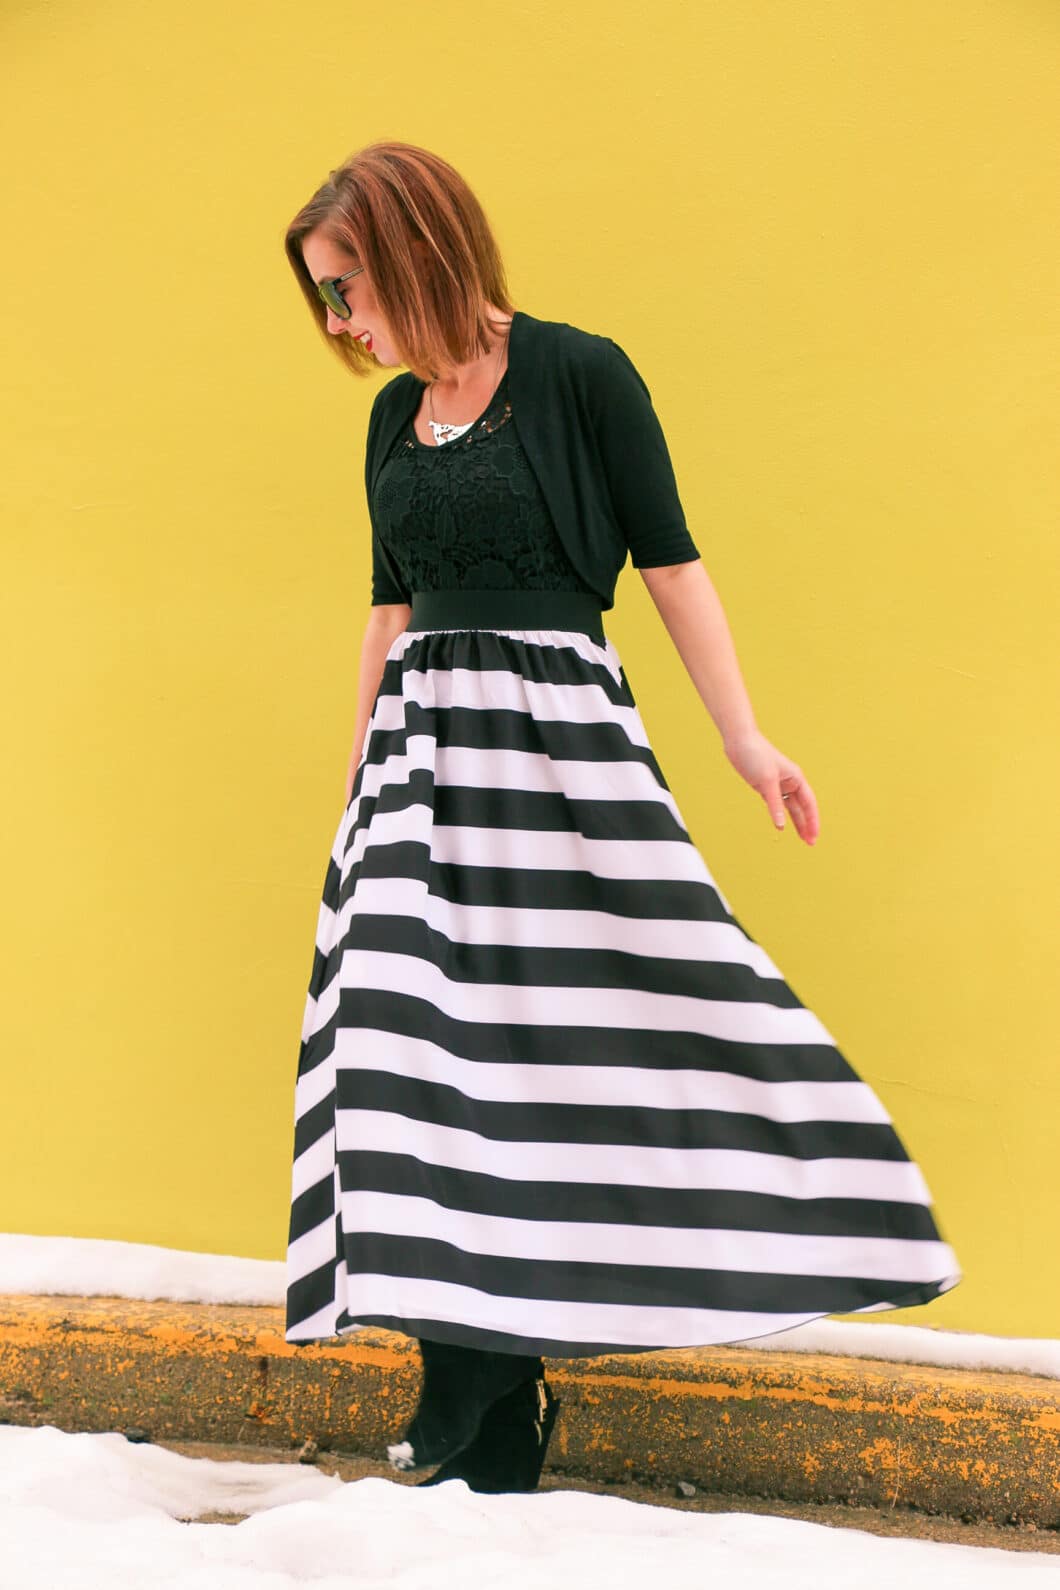 The Maxi Dress: From Summer to Winter